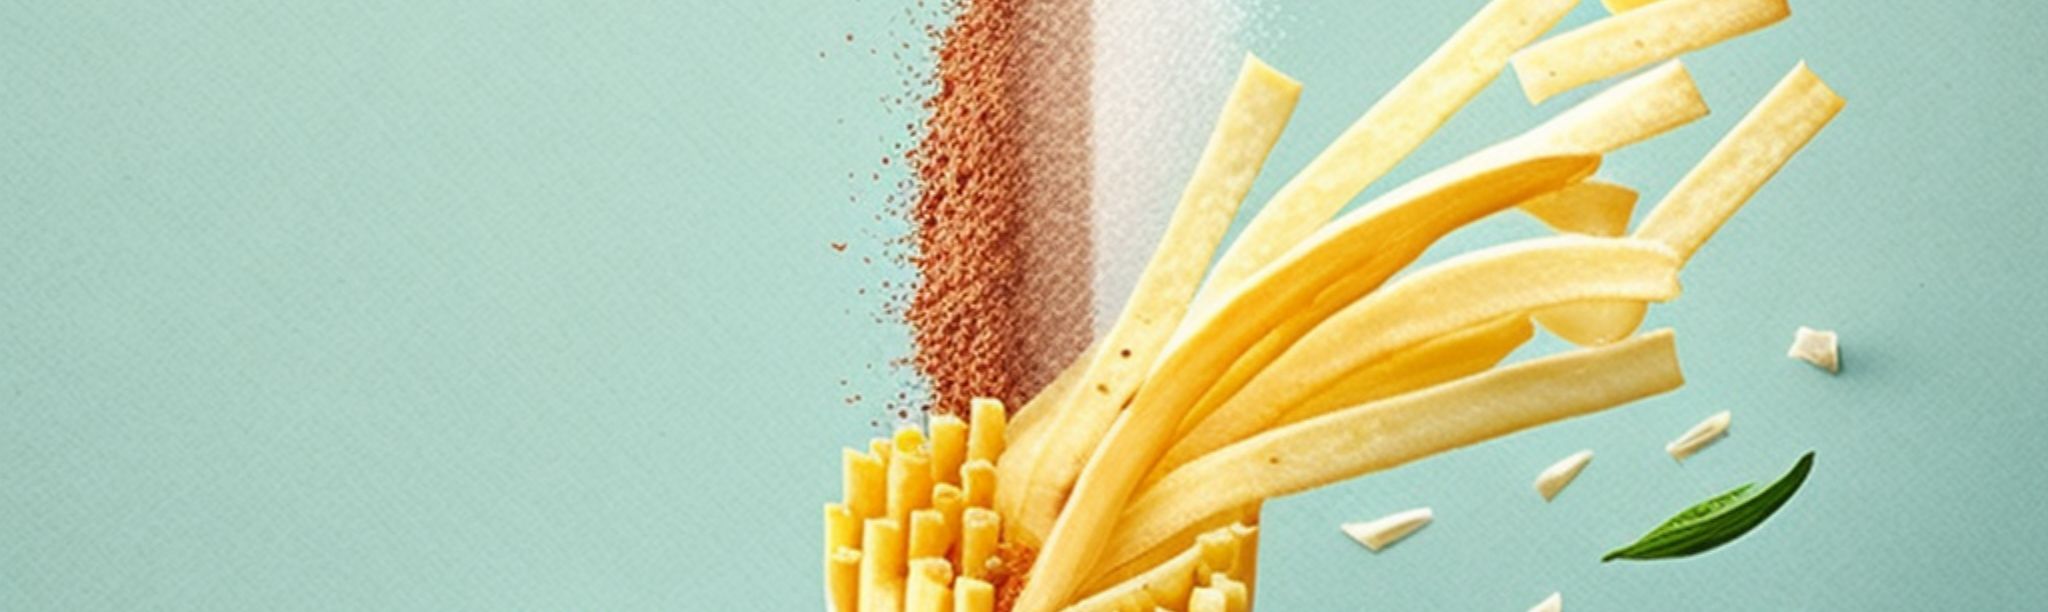 What is a french fry seasoning and how to use it?